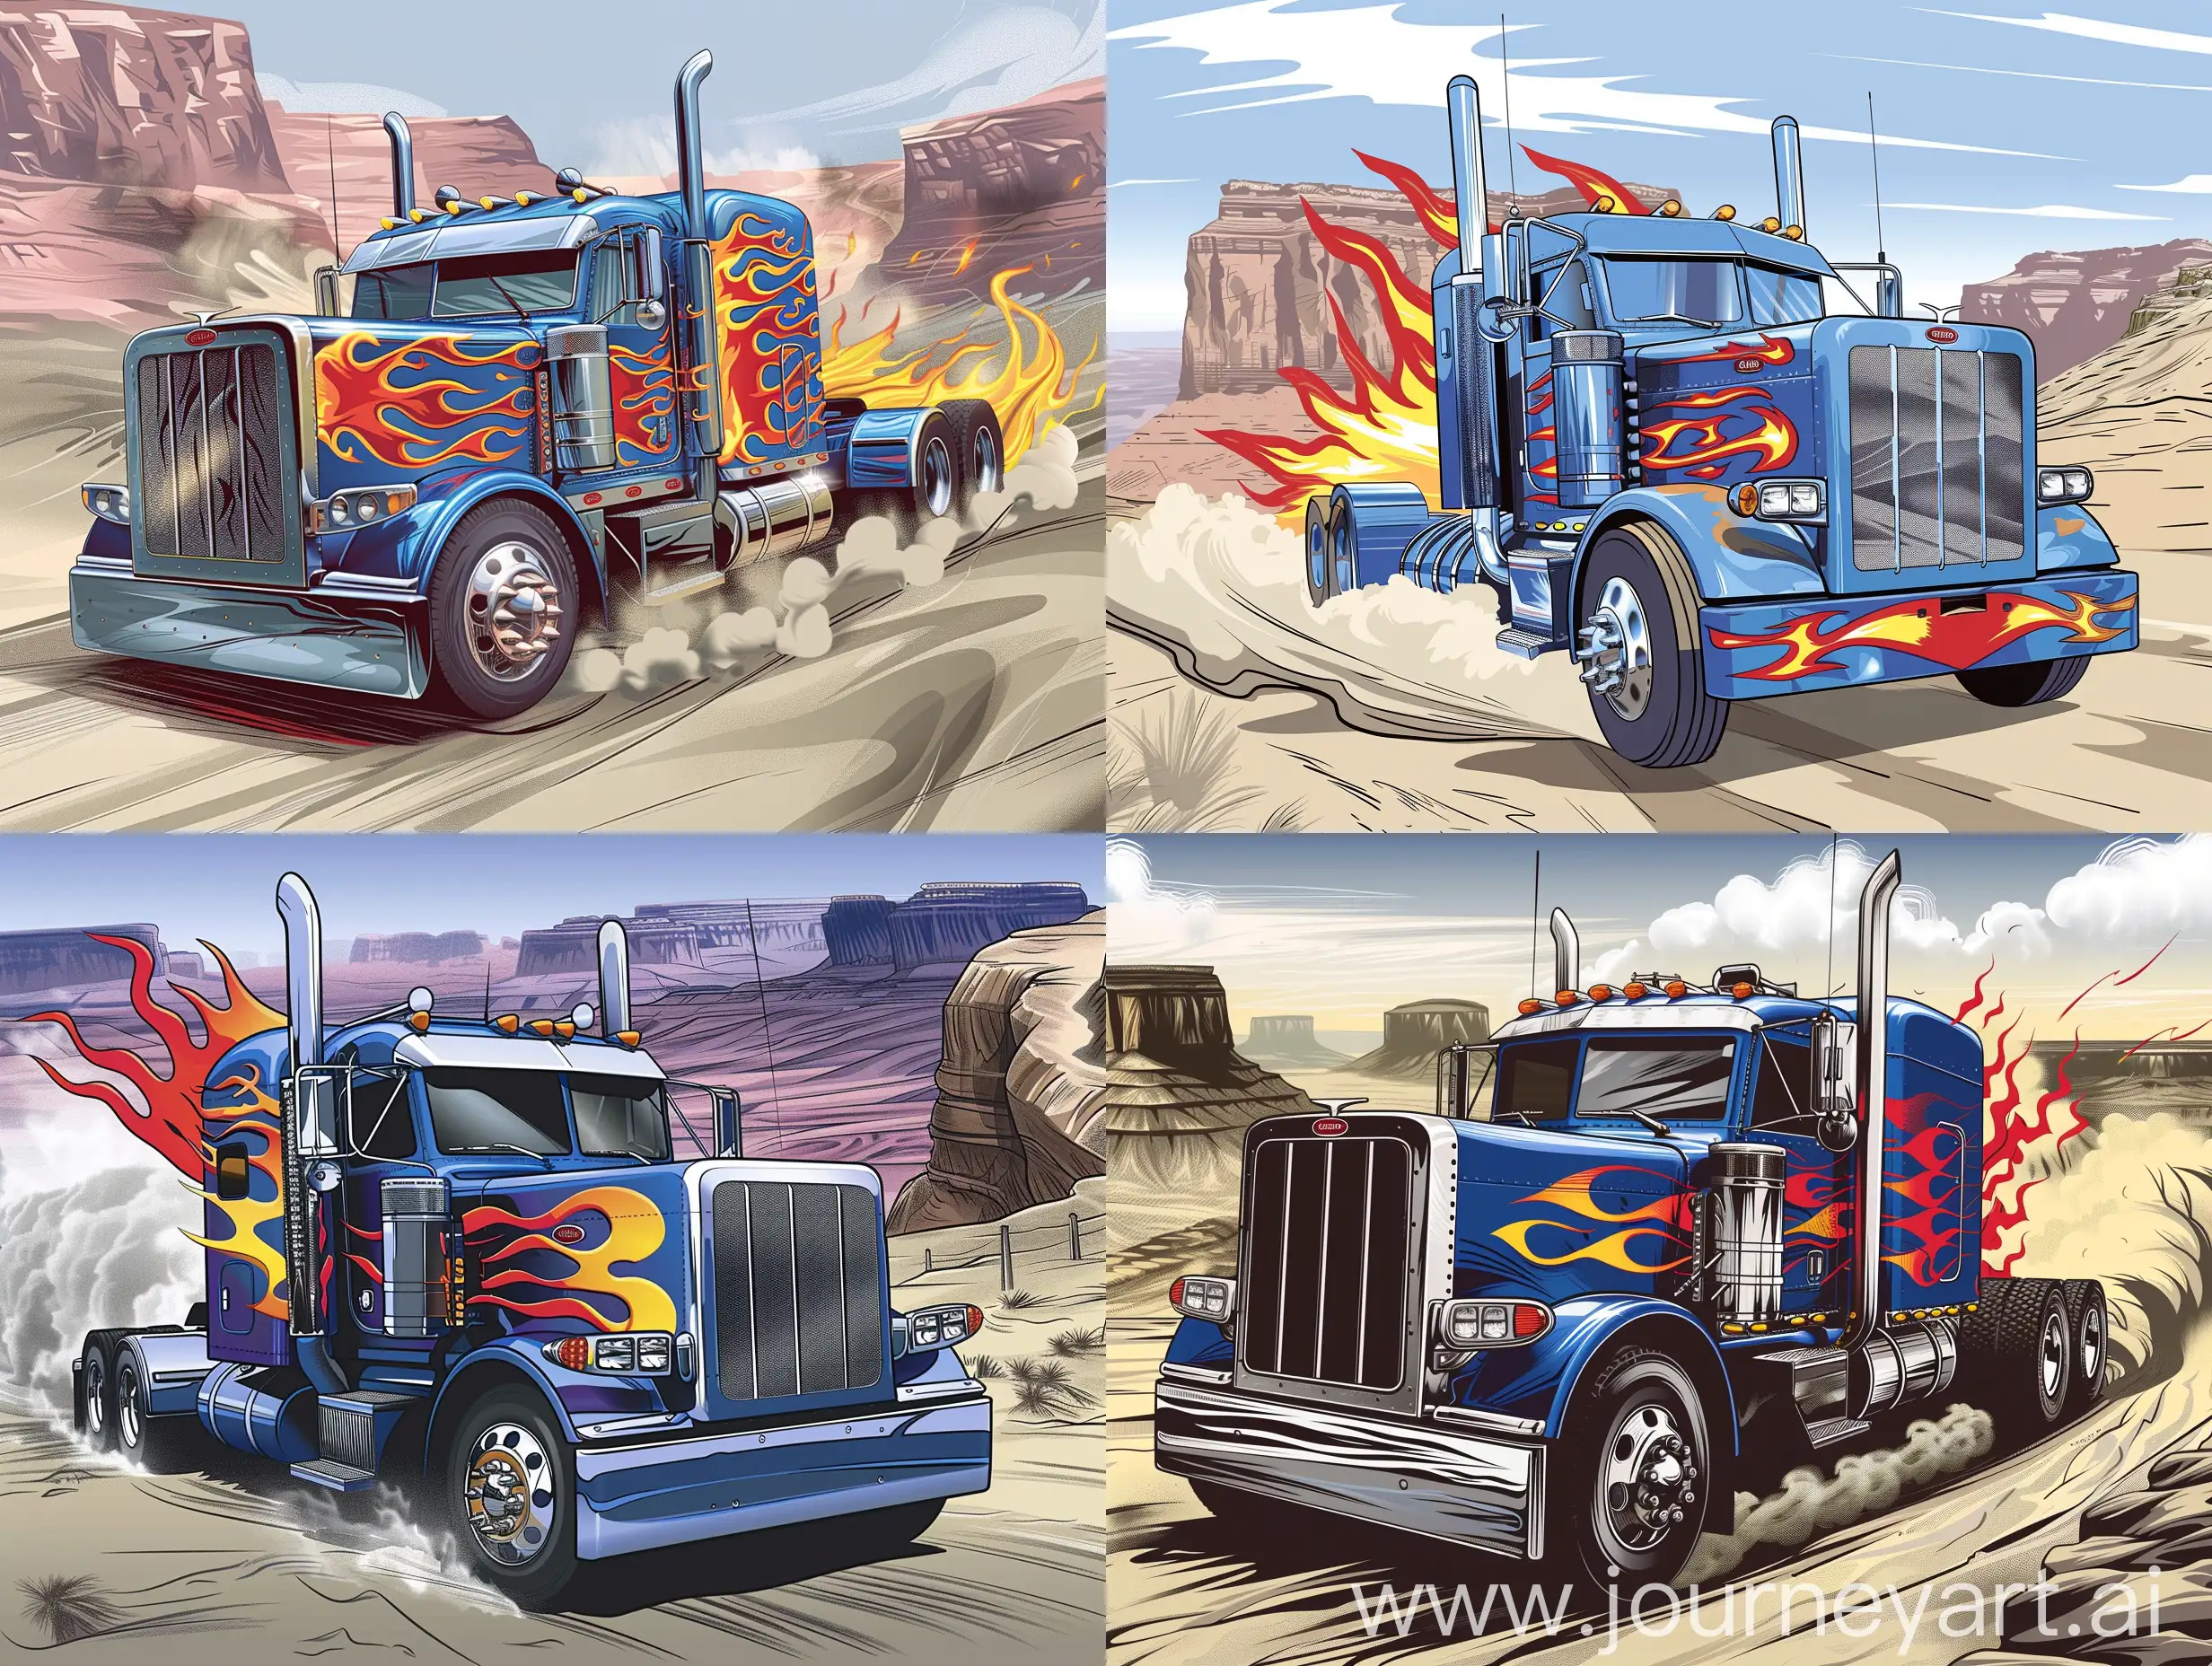 Illustration-of-Blue-Peterbilt-379-Truck-with-Flame-Pattern-Racing-through-Canyon